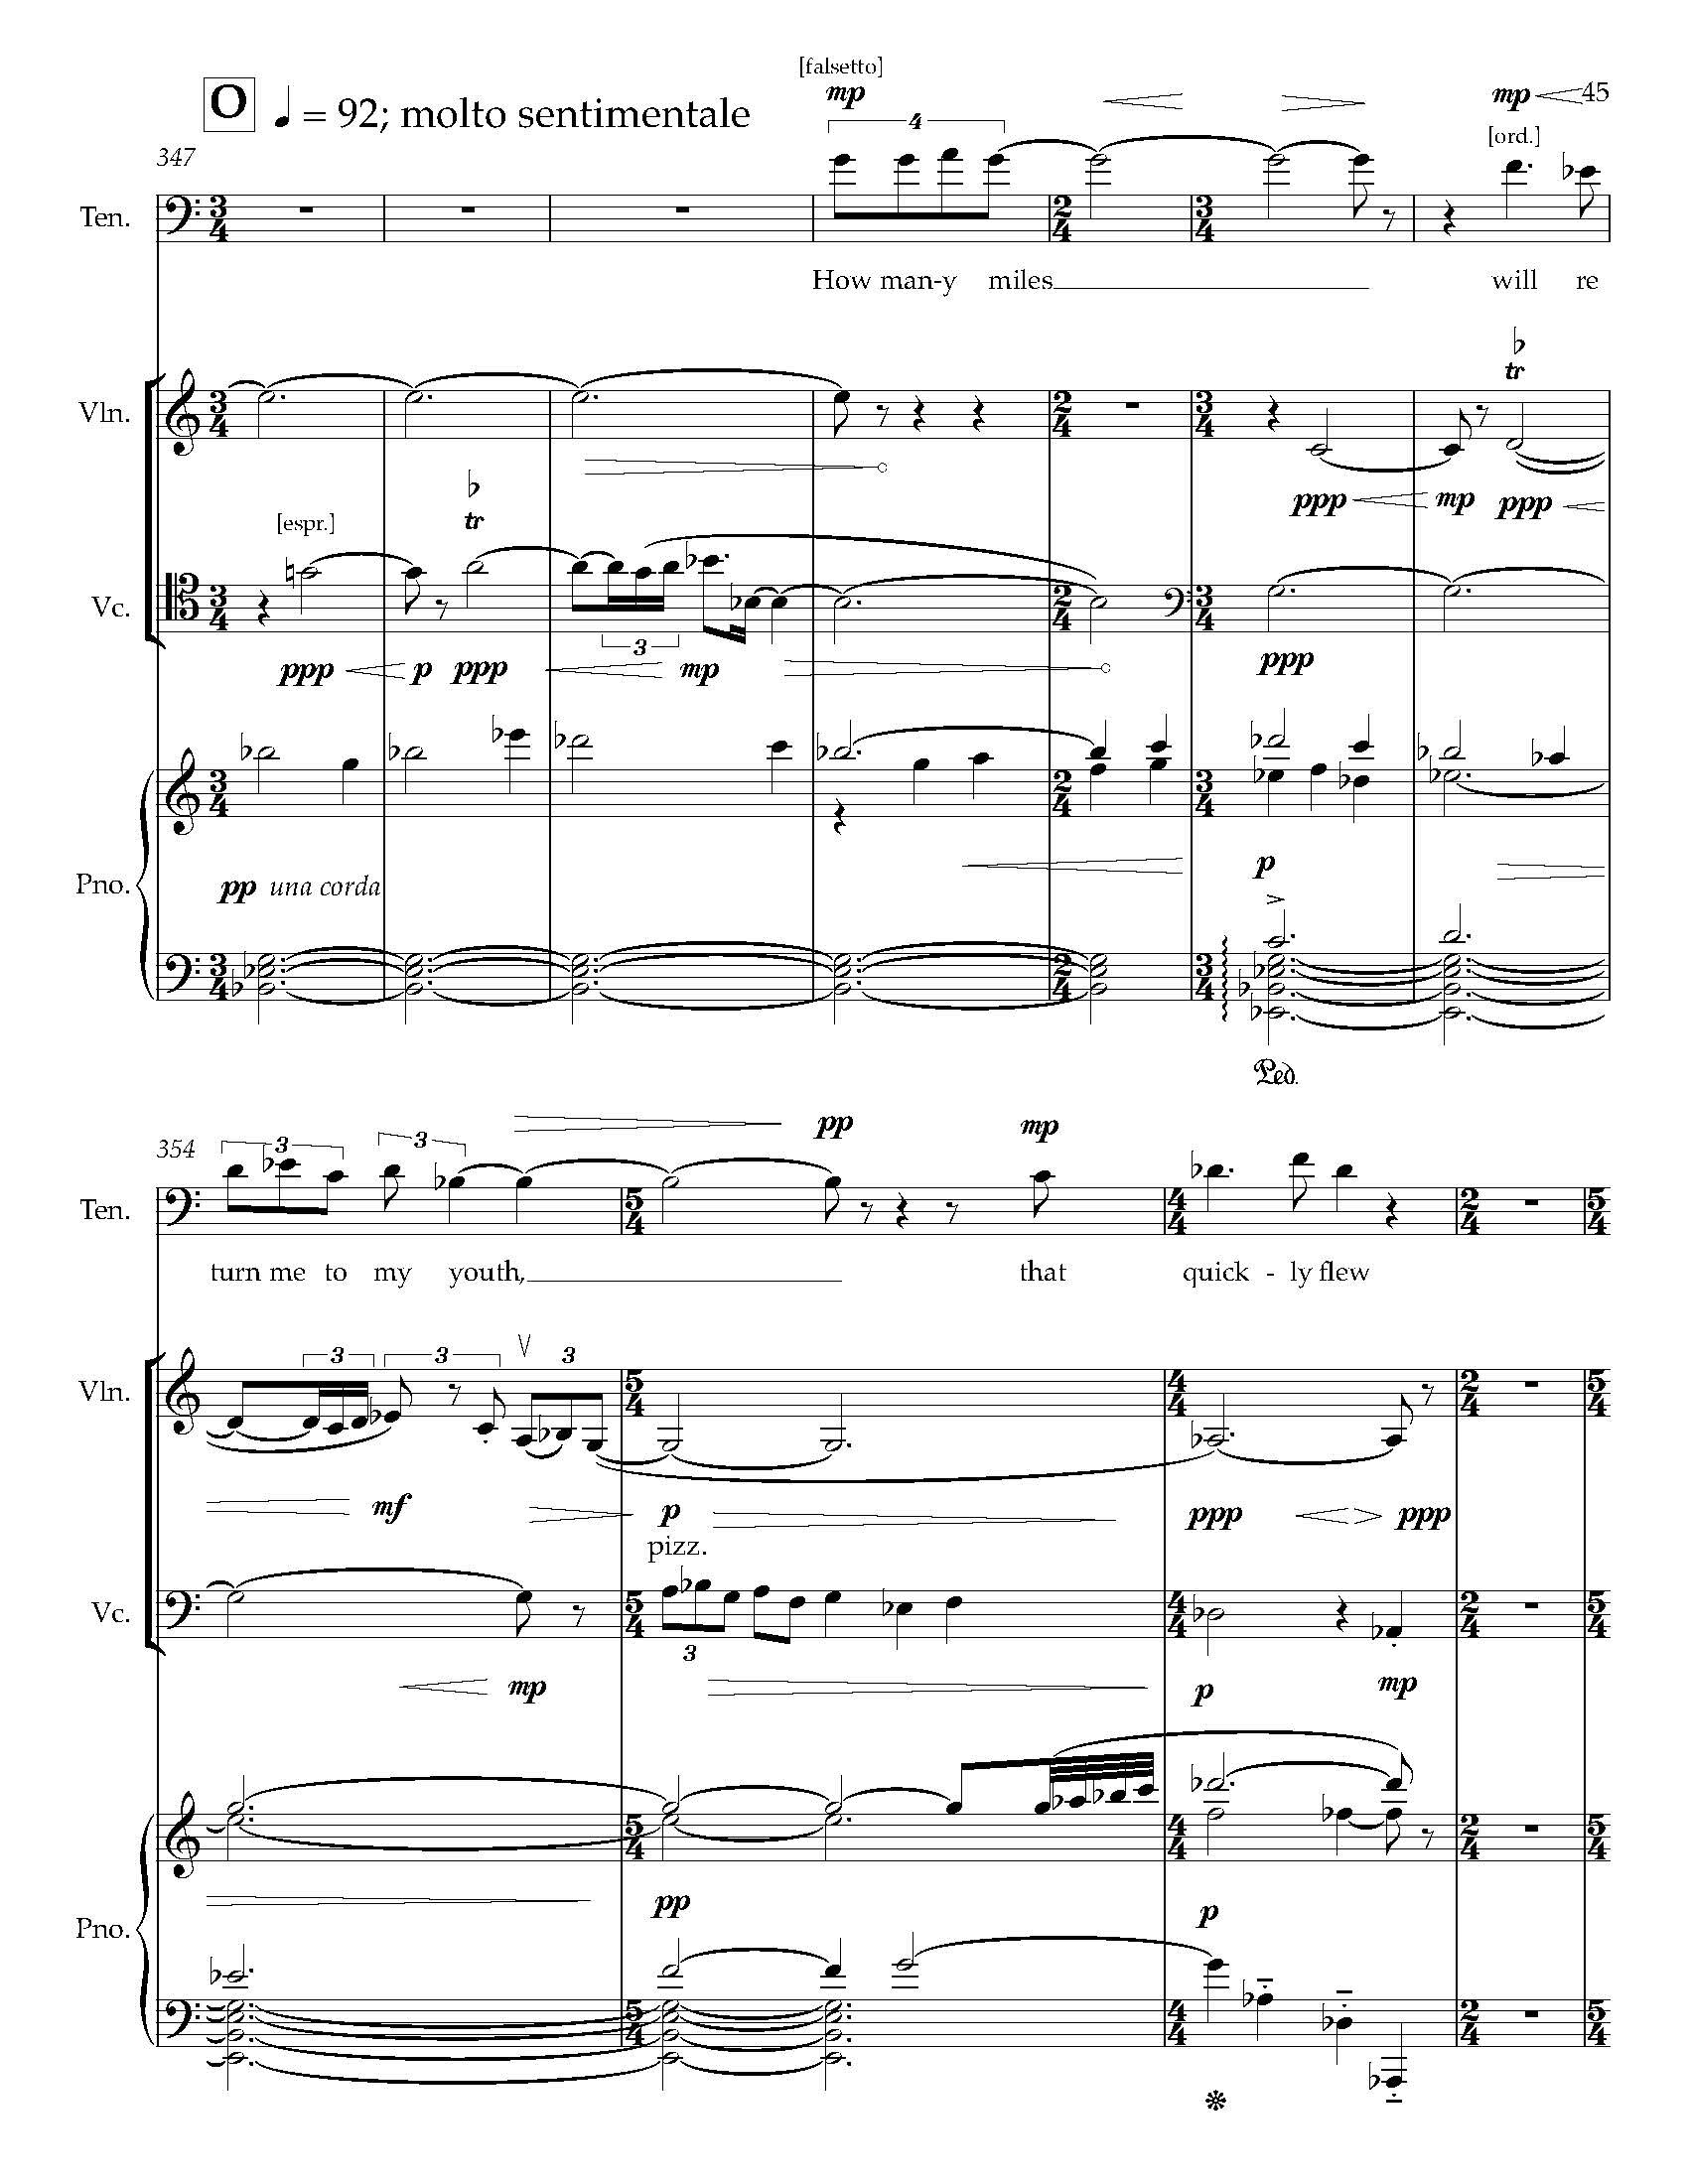 Gursky Songs - Complete Score_Page_53.jpg